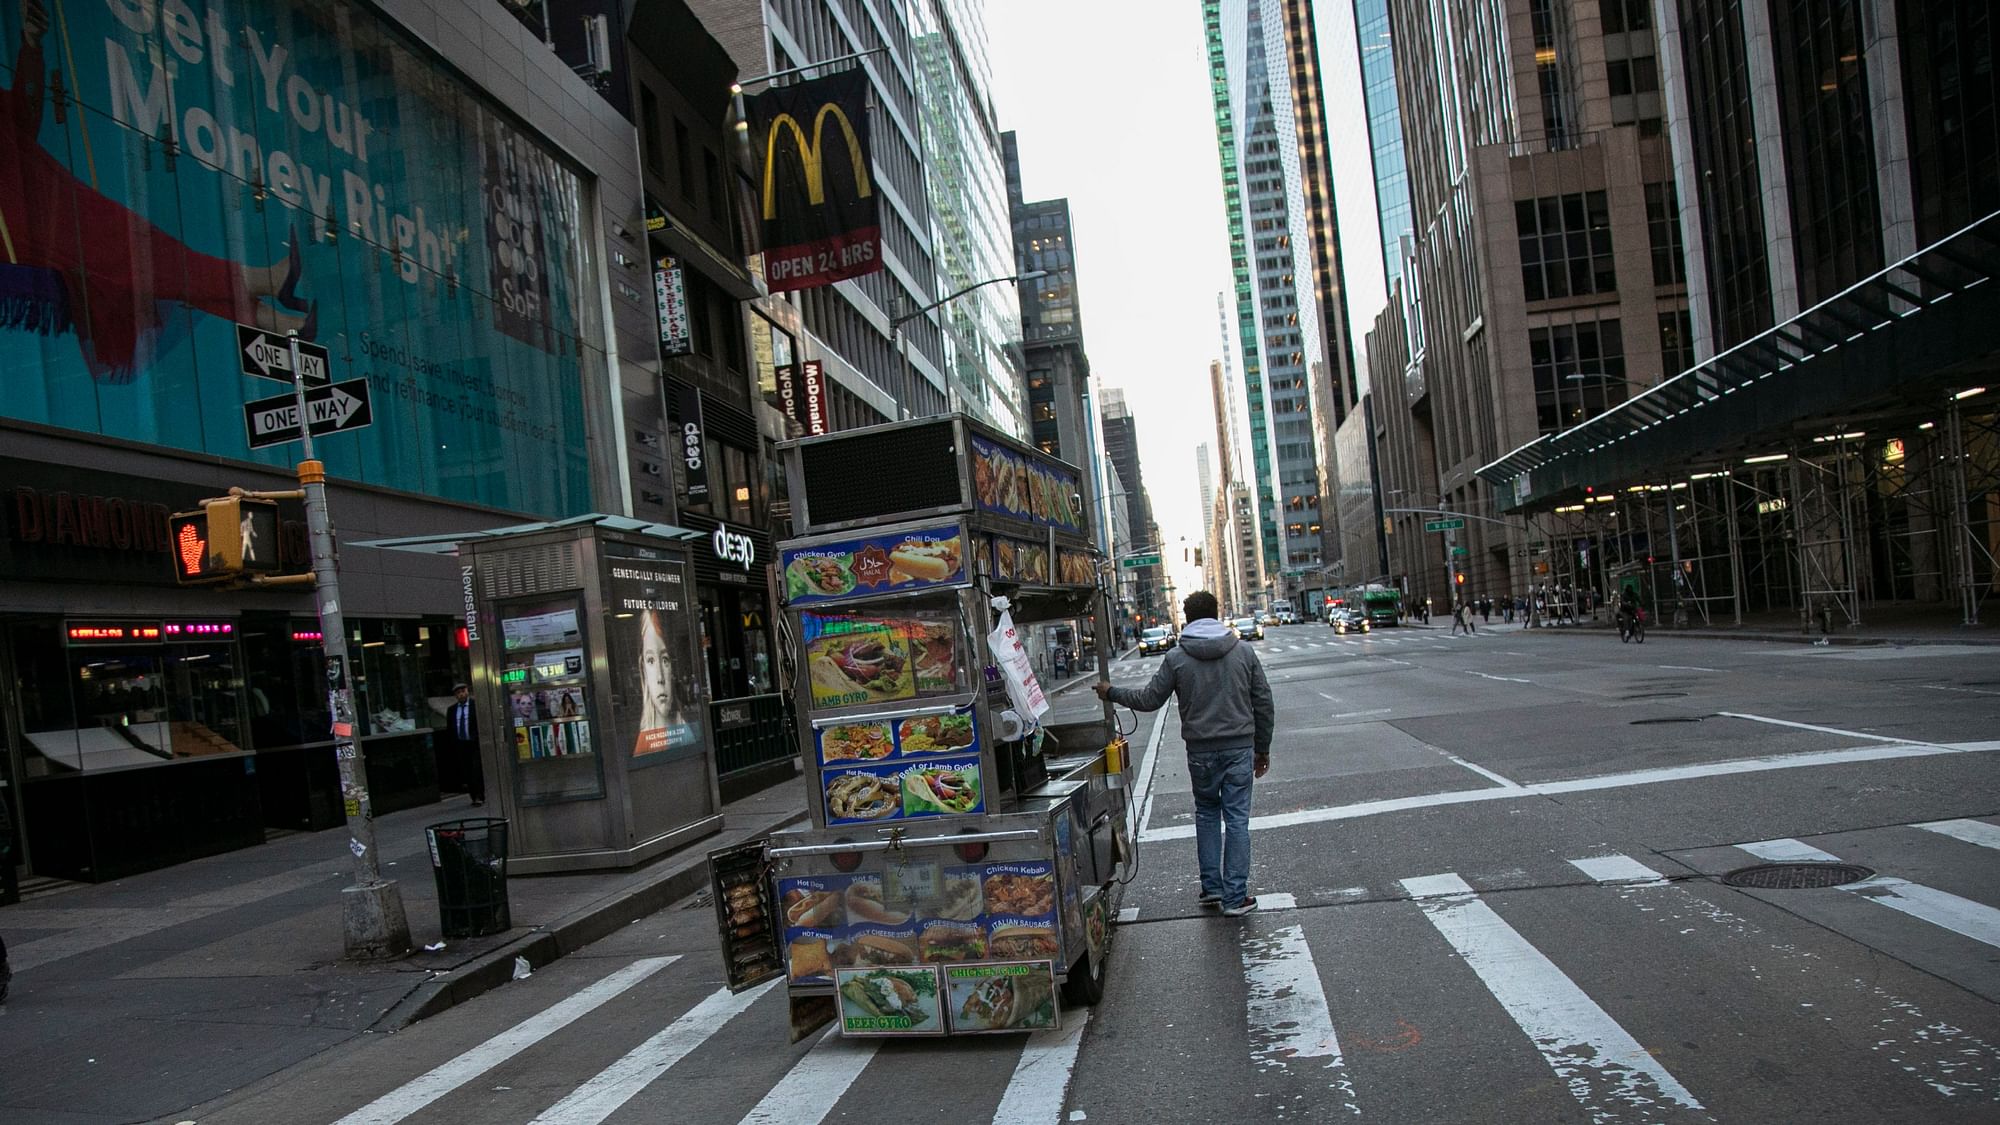 A food truck vendor pushes his cart down an empty street near Times Square in New York, on Sunday, 15 March 2020. 